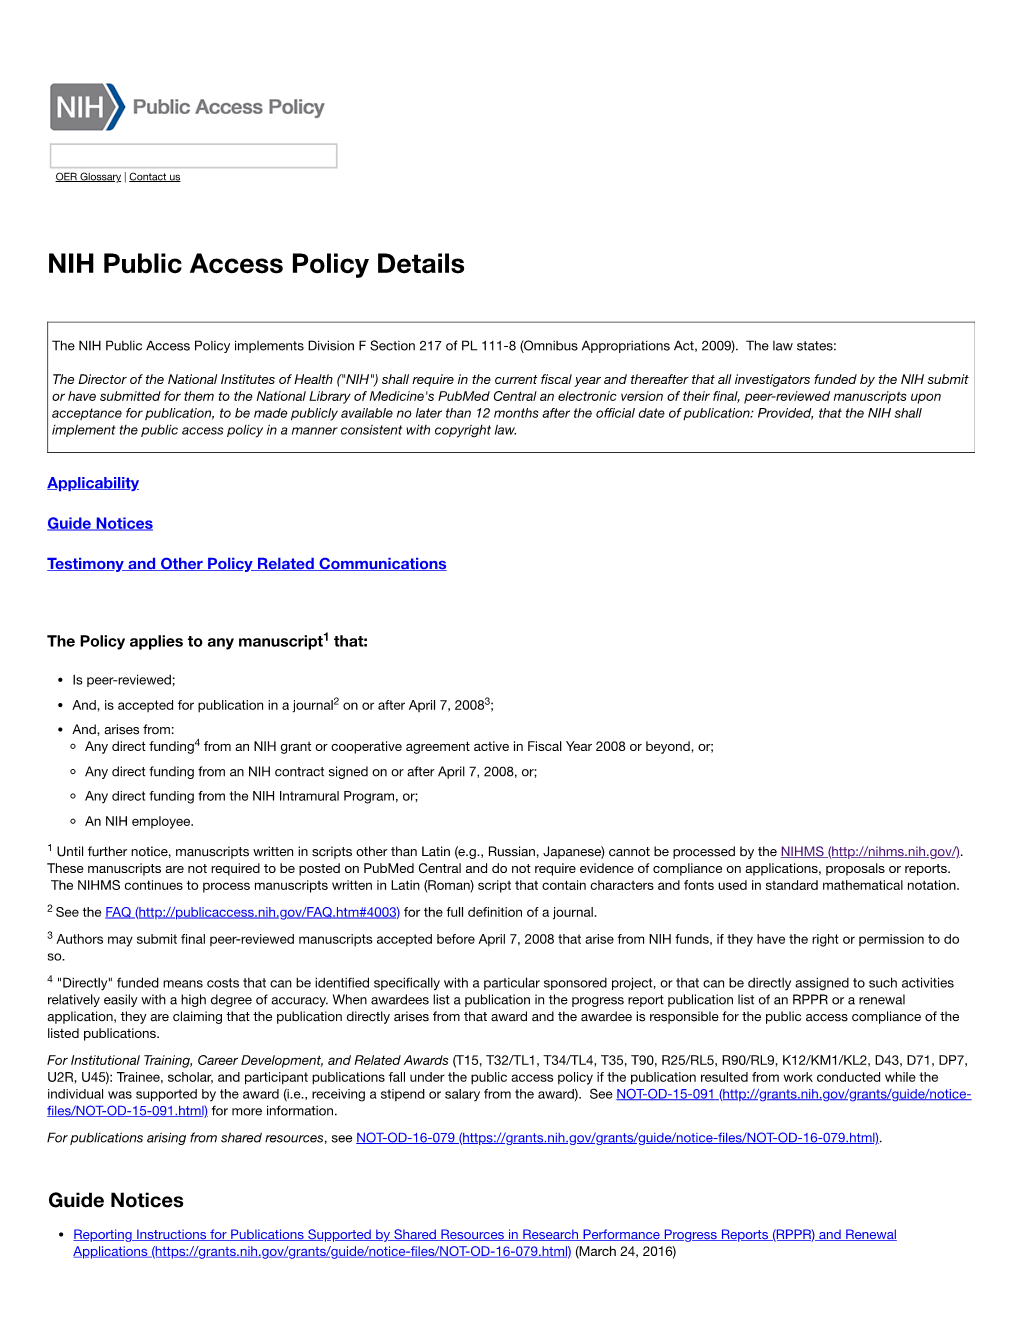 NIH Public Access Policy Details